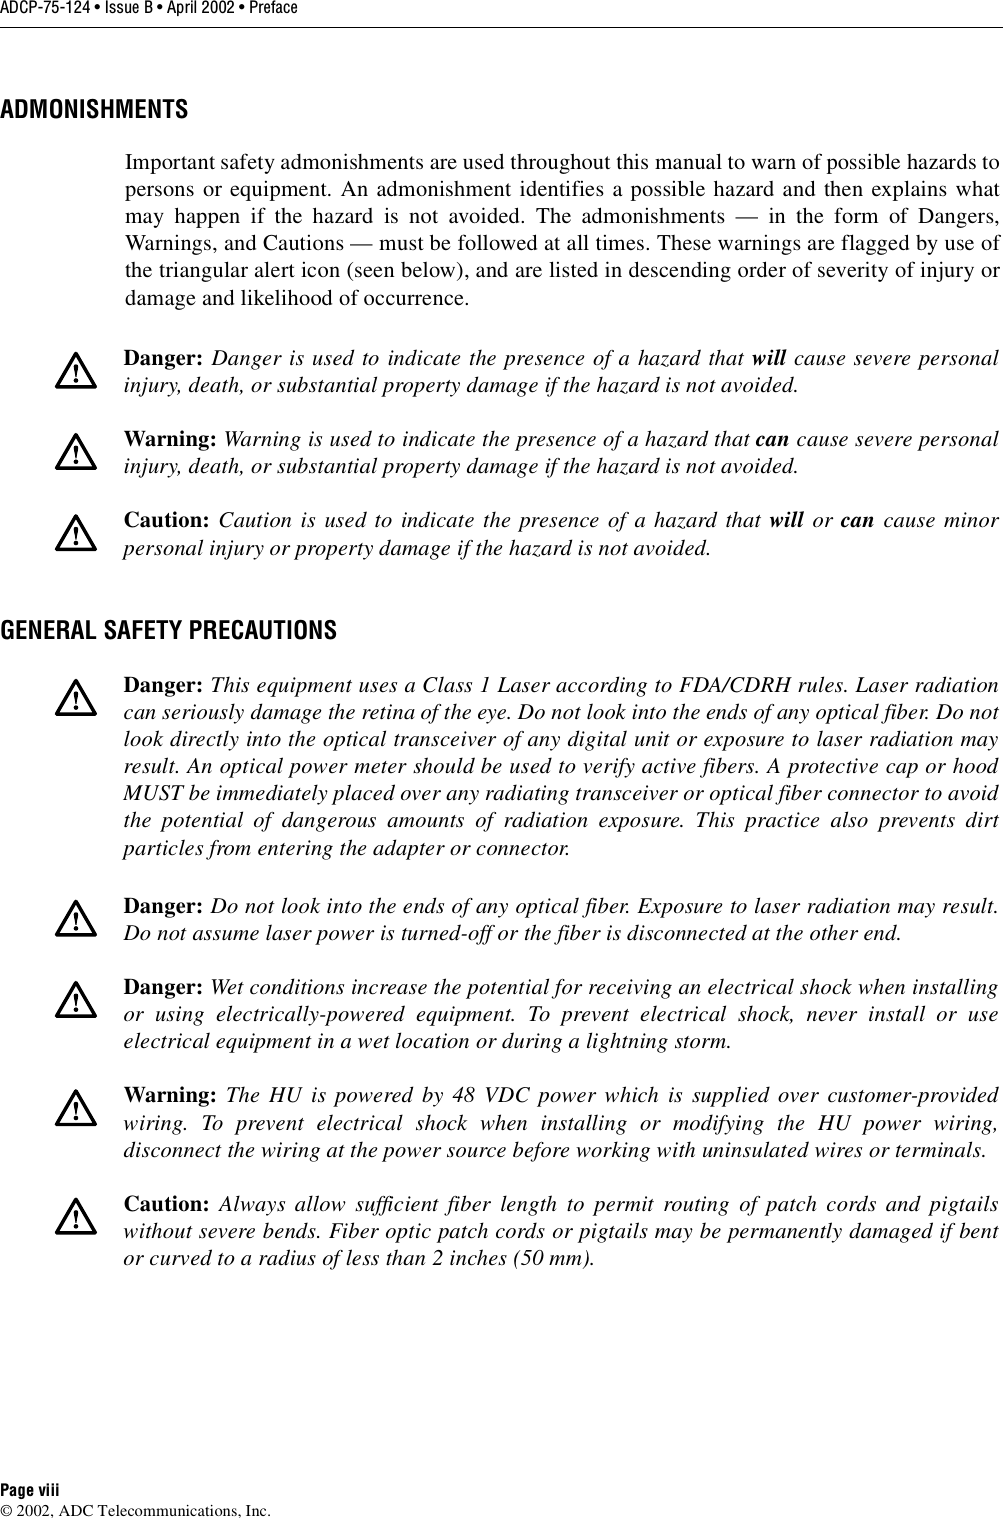 ADCP-75-124 • Issue B • April 2002 • PrefacePage viii©2002, ADC Telecommunications, Inc.ADMONISHMENTSImportant safety admonishments are used throughout this manual to warn of possible hazards topersons or equipment. An admonishment identifies apossible hazard and then explains whatmay happen if the hazard is not avoided. The admonishments —in the form of Dangers,Warnings, and Cautions —must be followed at all times. These warnings are flagged by use ofthe triangular alert icon (seen below), and are listed in descending order of severity of injury ordamage and likelihood of occurrence.GENERAL SAFETY PRECAUTIONSDanger: Danger is used to indicate the presence of ahazard that will cause severe personalinjury, death, or substantial property damage if the hazard is not avoided.Warning: Warning is used to indicate the presence of ahazard that can cause severe personalinjury, death, or substantial property damage if the hazard is not avoided.Caution: Caution is used to indicate the presence of ahazard that will or can cause minorpersonal injury or property damage if the hazard is not avoided.Danger: This equipment uses aClass 1Laser according to FDA/CDRH rules. Laser radiationcan seriously damage the retina of the eye. Do not look into the ends of any optical fiber. Do notlook directly into the optical transceiver of any digital unit or exposure to laser radiation mayresult. An optical power meter should be used to verify active fibers. Aprotective cap or hoodMUST be immediately placed over any radiating transceiver or optical fiber connector to avoidthe potential of dangerous amounts of radiation exposure. This practice also prevents dirtparticles from entering the adapter or connector.Danger: Do not look into the ends of any optical fiber. Exposure to laser radiation may result.Do not assume laser power is turned-off or the fiber is disconnected at the other end.Danger: Wet conditions increase the potential for receiving an electrical shock when installingor using electrically-powered equipment. To prevent electrical shock, never install or useelectrical equipment in awet location or during alightning storm.Warning: The HU is powered by 48 VDC power which is supplied over customer-providedwiring. To prevent electrical shock when installing or modifying the HU power wiring,disconnect the wiring at the power source before working with uninsulated wires or terminals.Caution: Always allow sufficient fiber length to permit routing of patch cords and pigtailswithout severe bends. Fiber optic patch cords or pigtails may be permanently damaged if bentor curved to aradius of less than 2inches (50 mm).